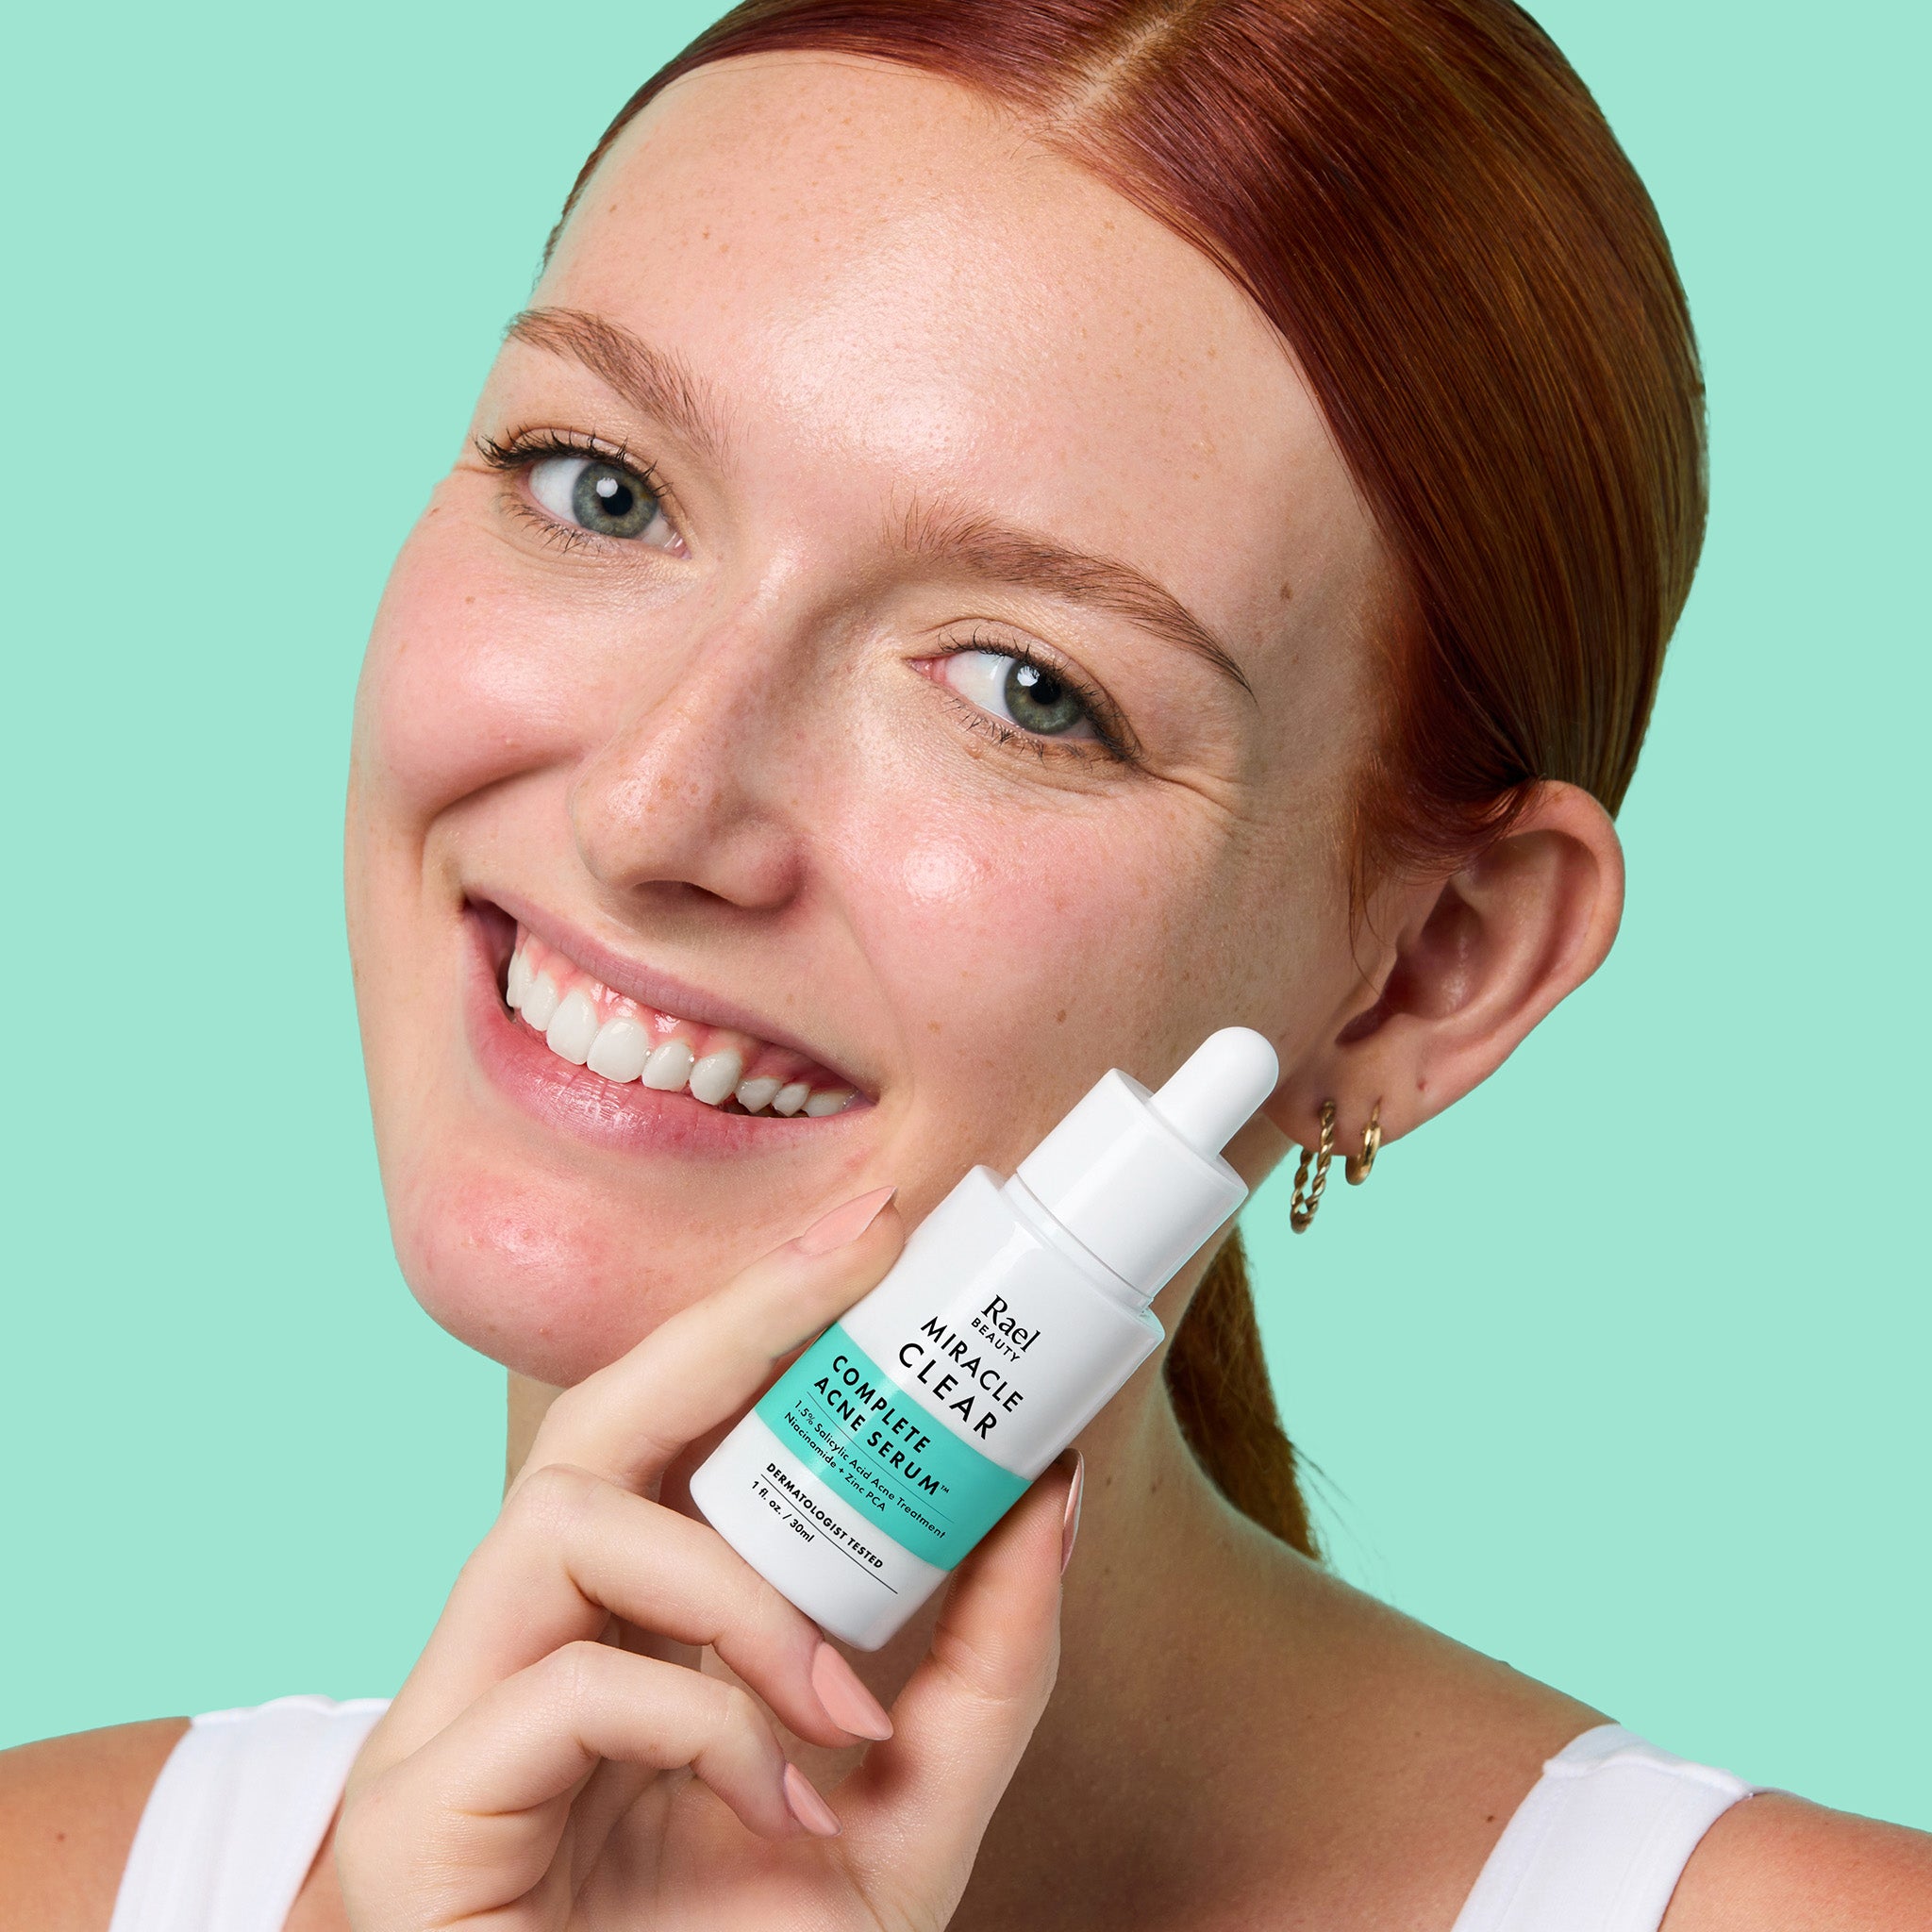 Girl holding a bottle of Miracle Clear Salicylic Acid Serum for Acne